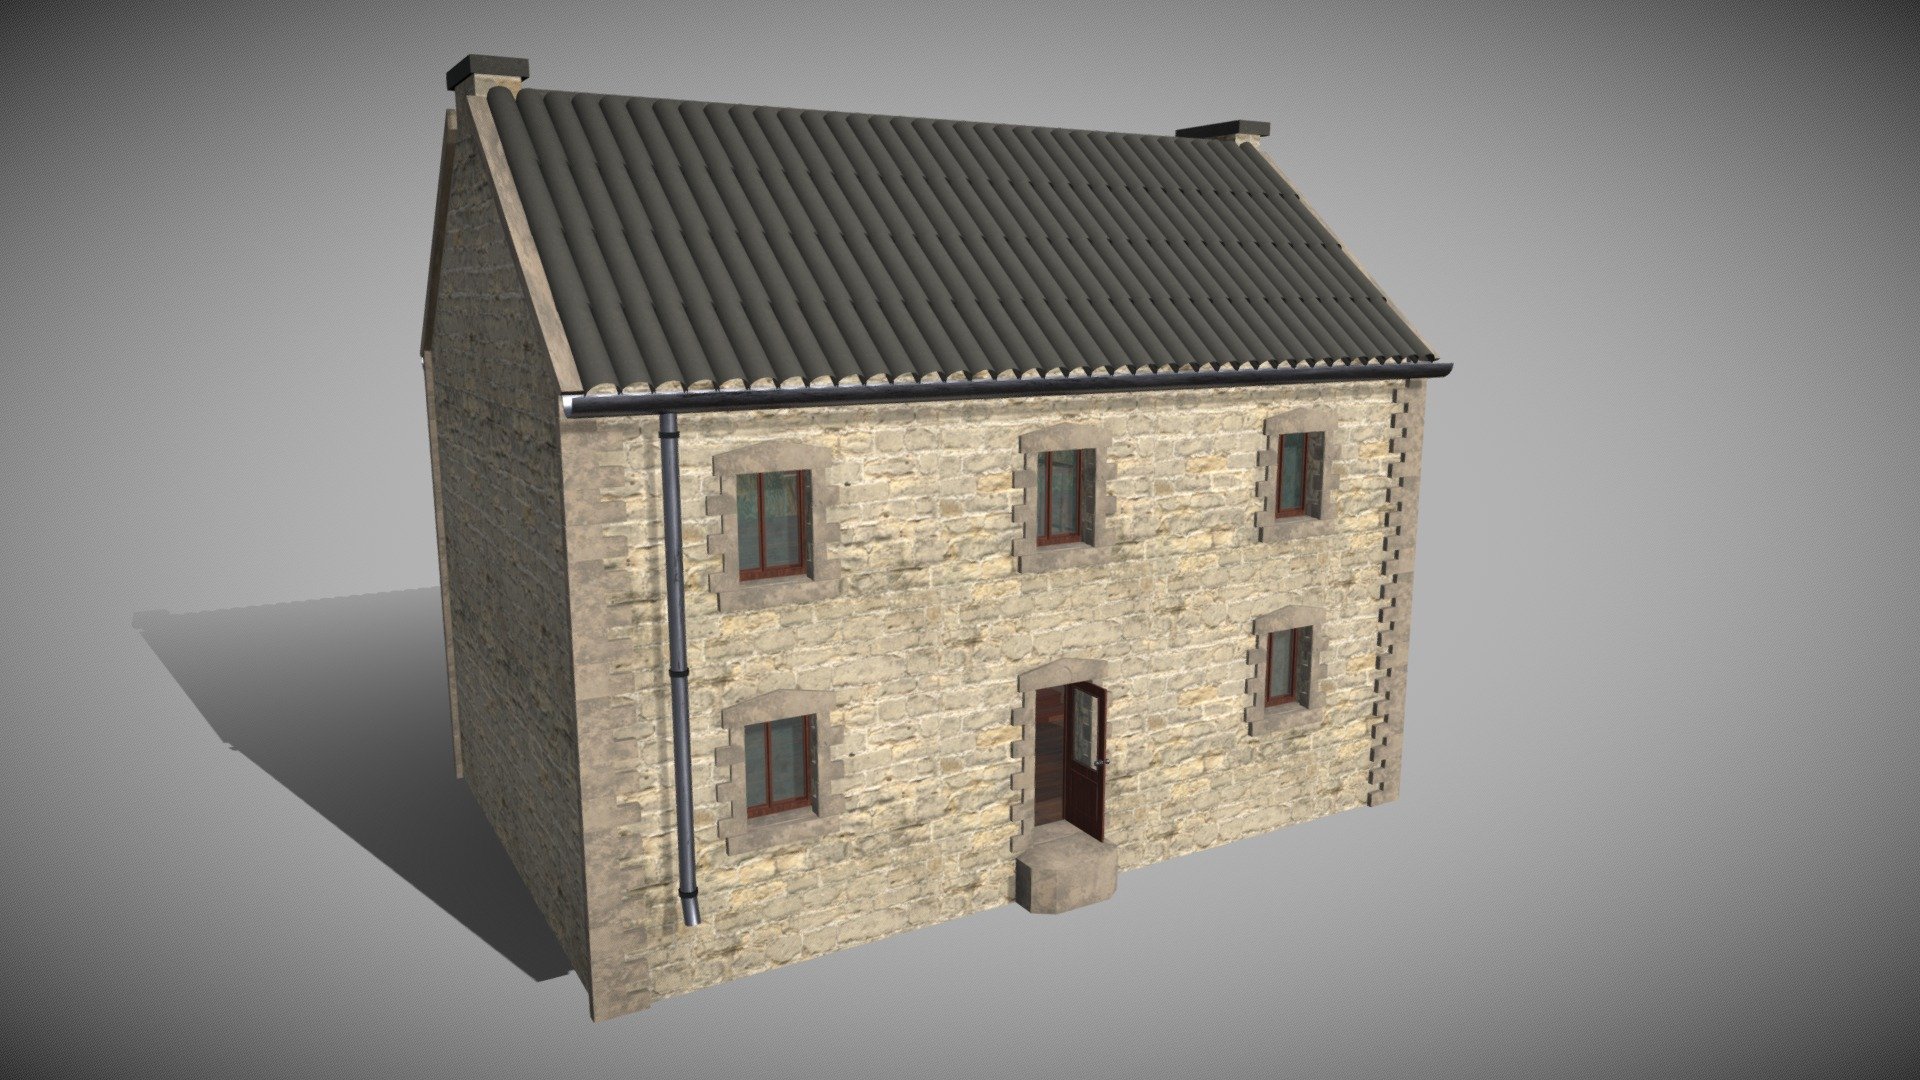 WW2 Normandy Era French House
with interior

Modelled in Blender and textured in Substance painter.
Low poly &amp; Game ready - WW2 Normandy Era French House - Buy Royalty Free 3D model by Golden (@goldenblack4) 3d model